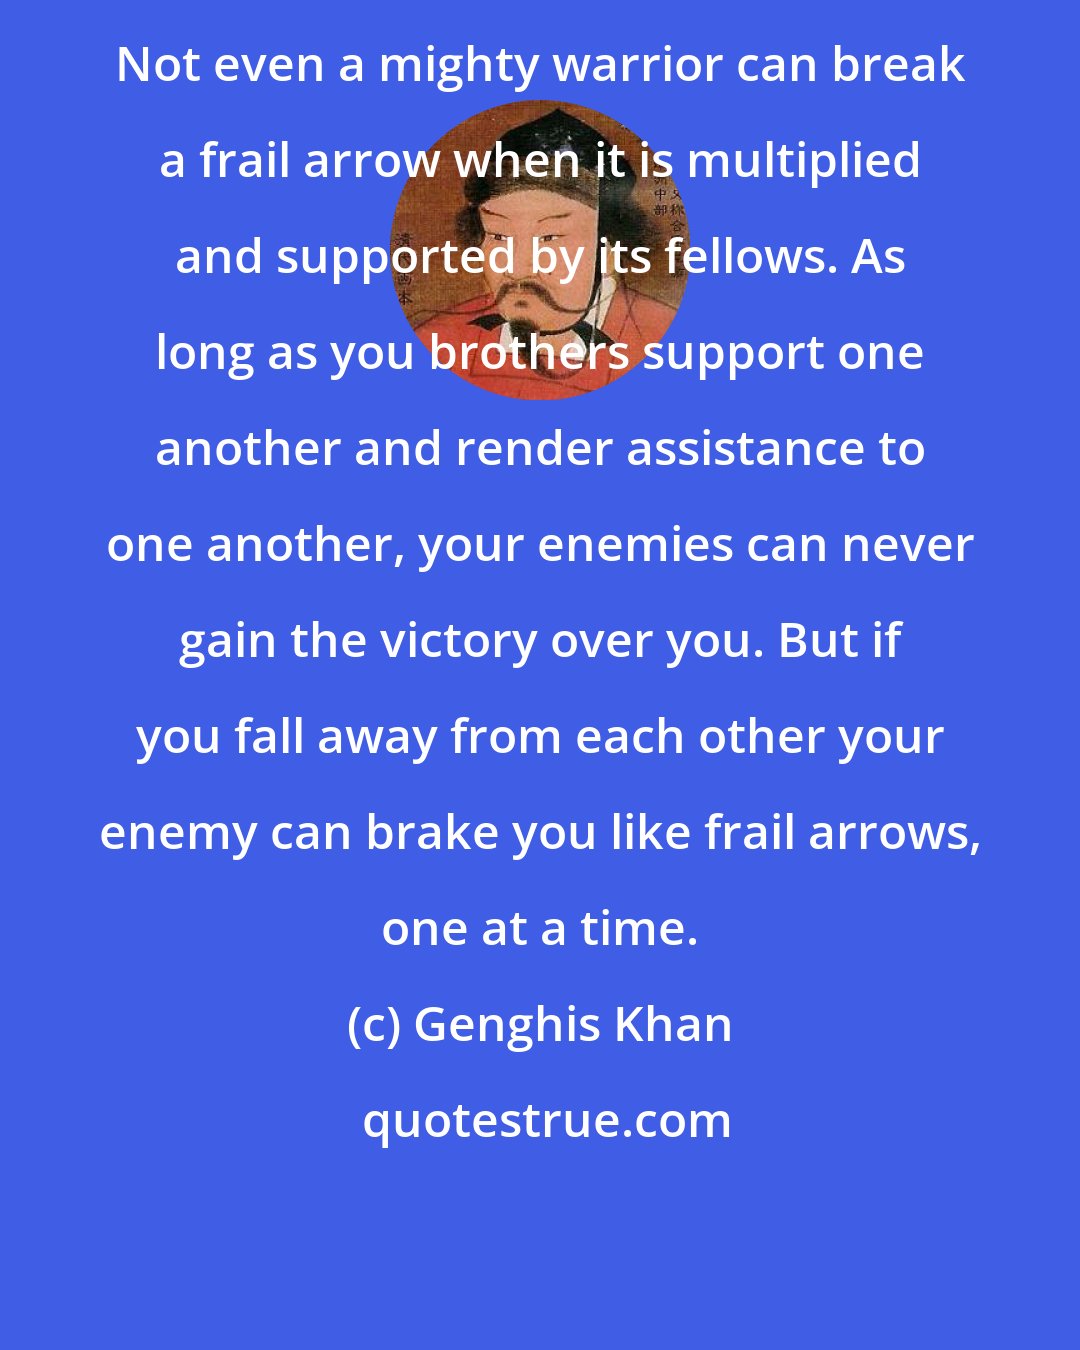 Genghis Khan: Not even a mighty warrior can break a frail arrow when it is multiplied and supported by its fellows. As long as you brothers support one another and render assistance to one another, your enemies can never gain the victory over you. But if you fall away from each other your enemy can brake you like frail arrows, one at a time.